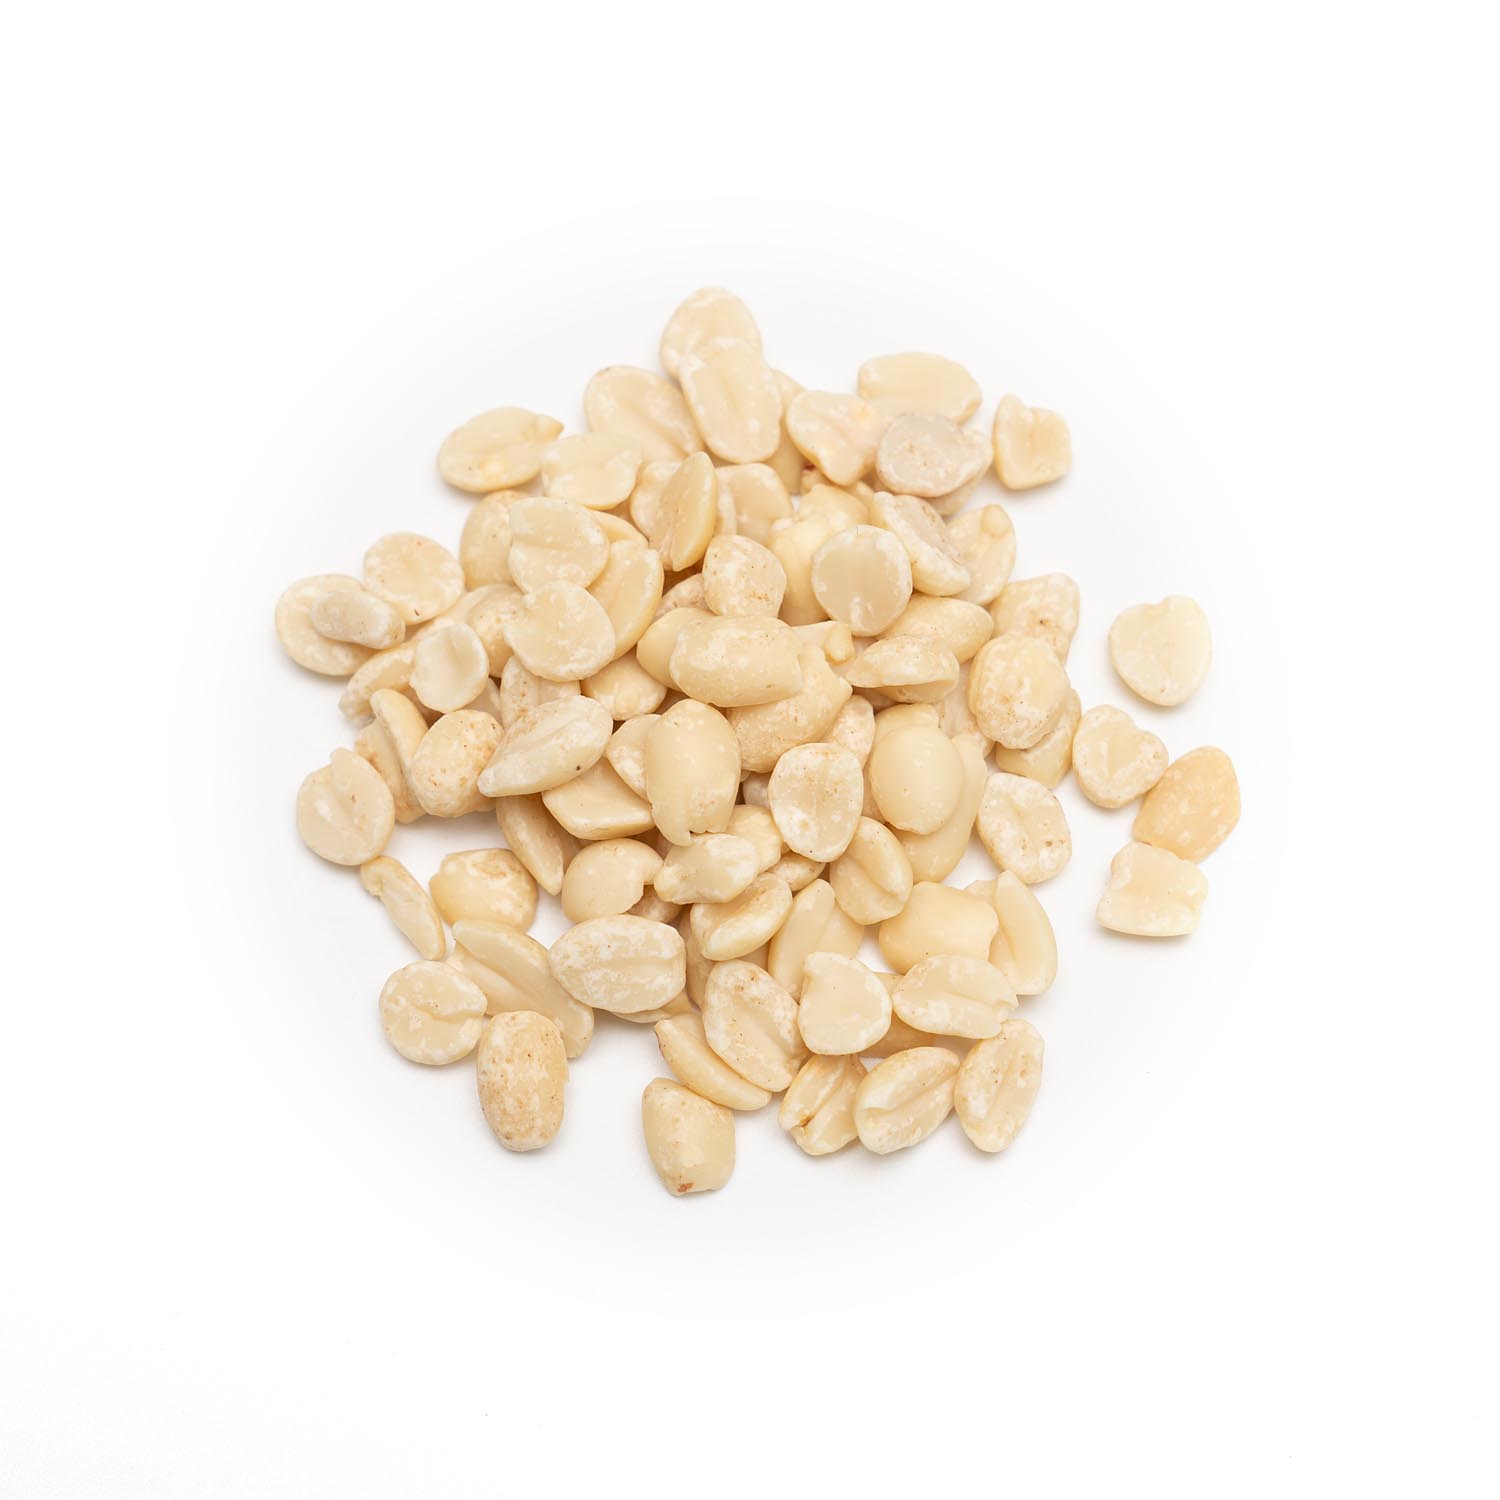 Organic Blanched Peanuts